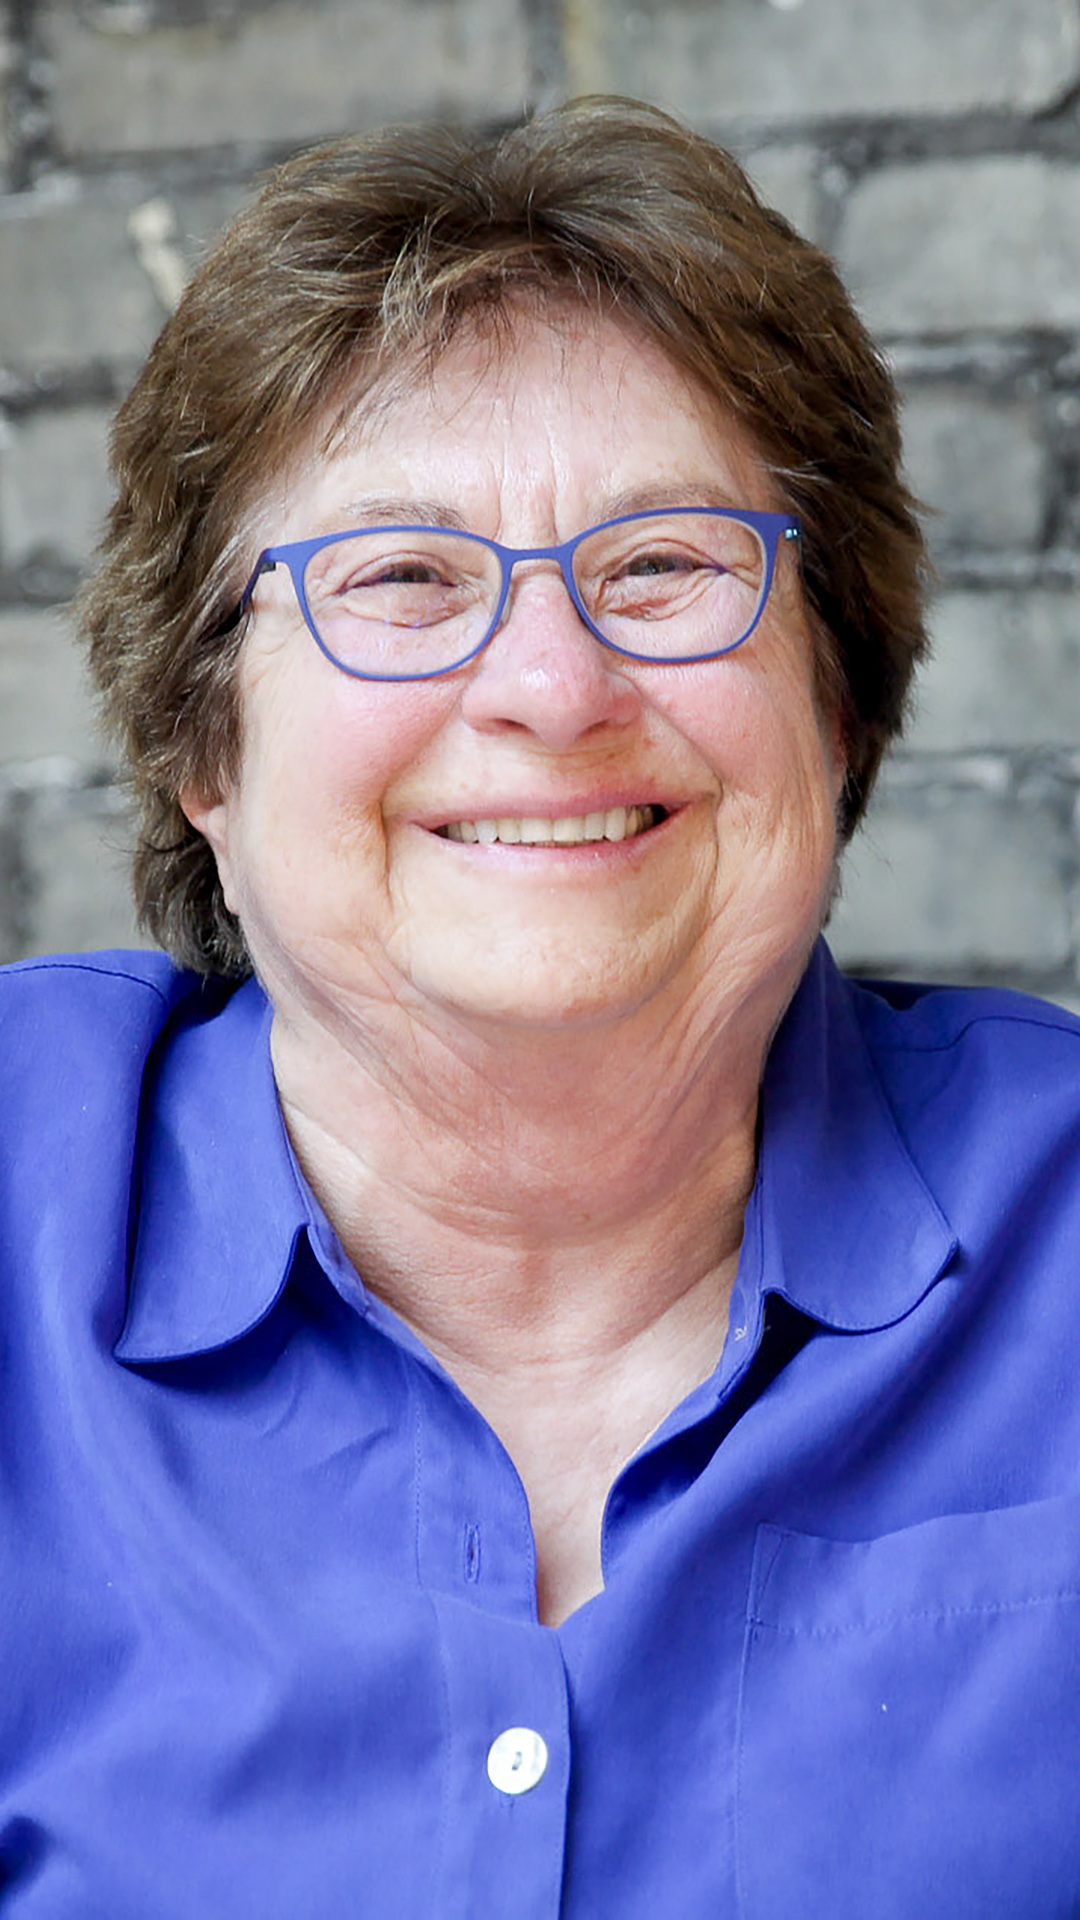 Sue Eckhart poses for a portrait while sitting in a room with a brick wall in the background.